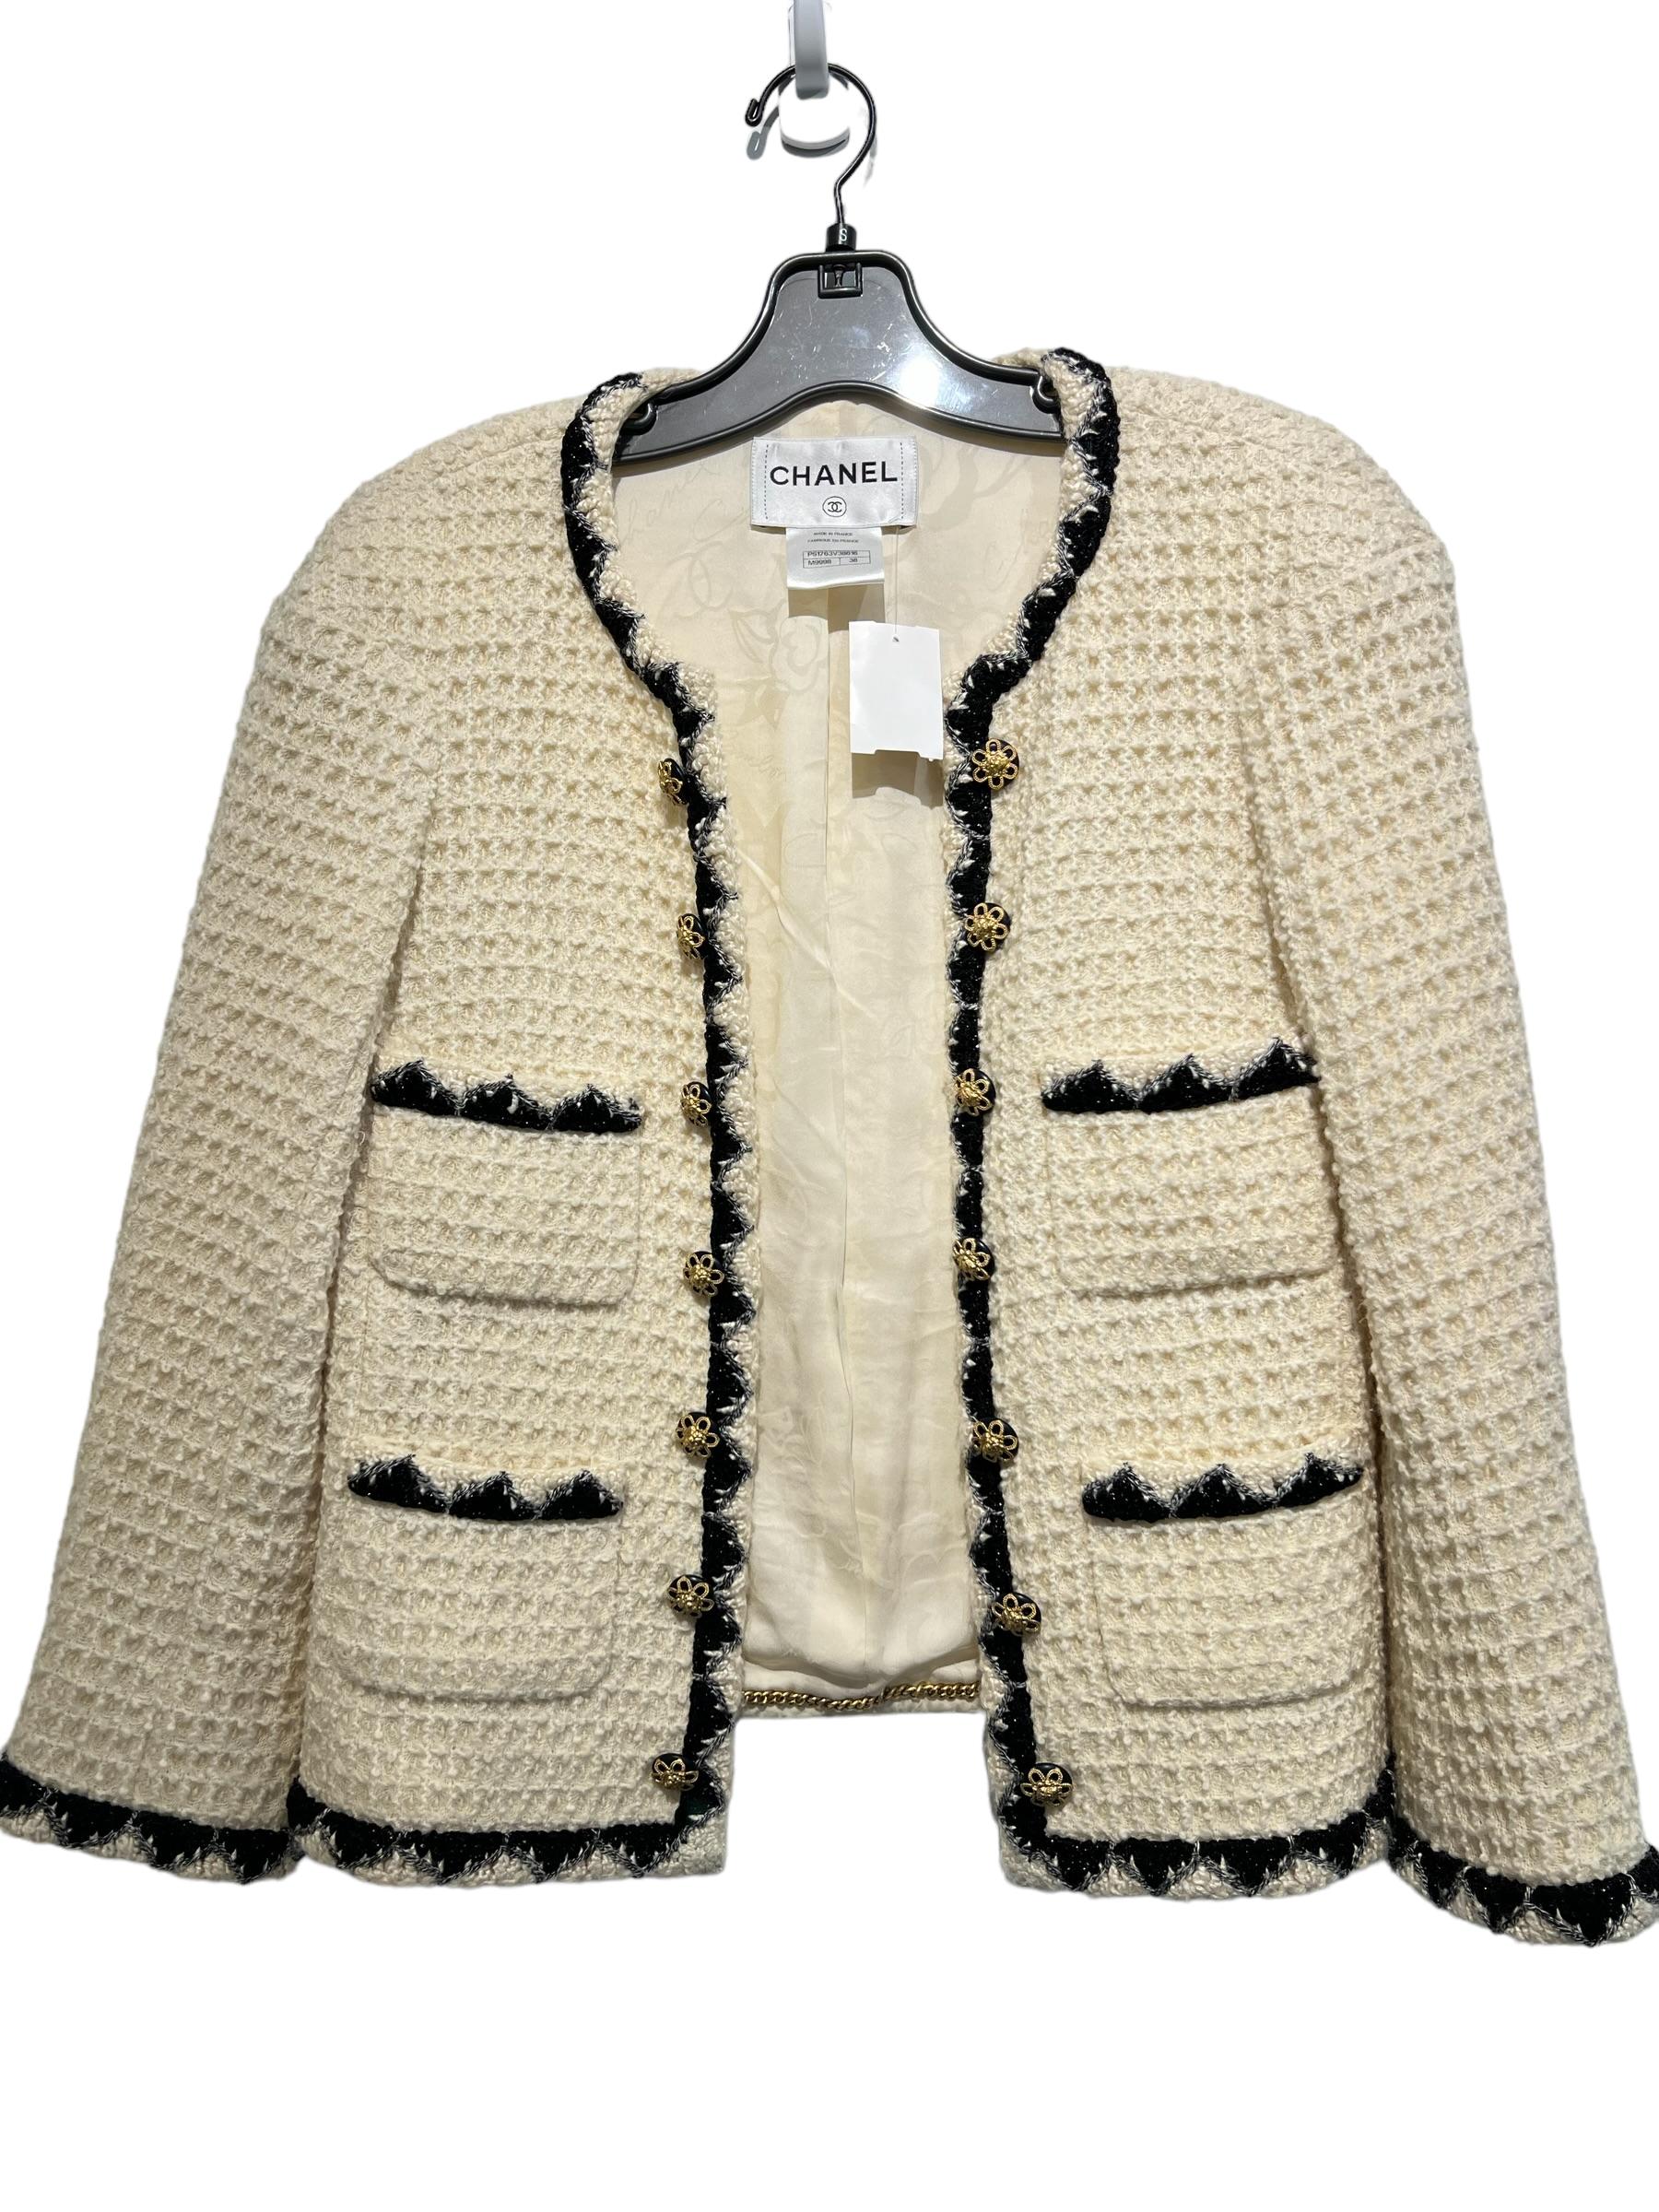 Women's Chanel Women´s Jacket Cream With Black Trim Buttons With Gold Flowers